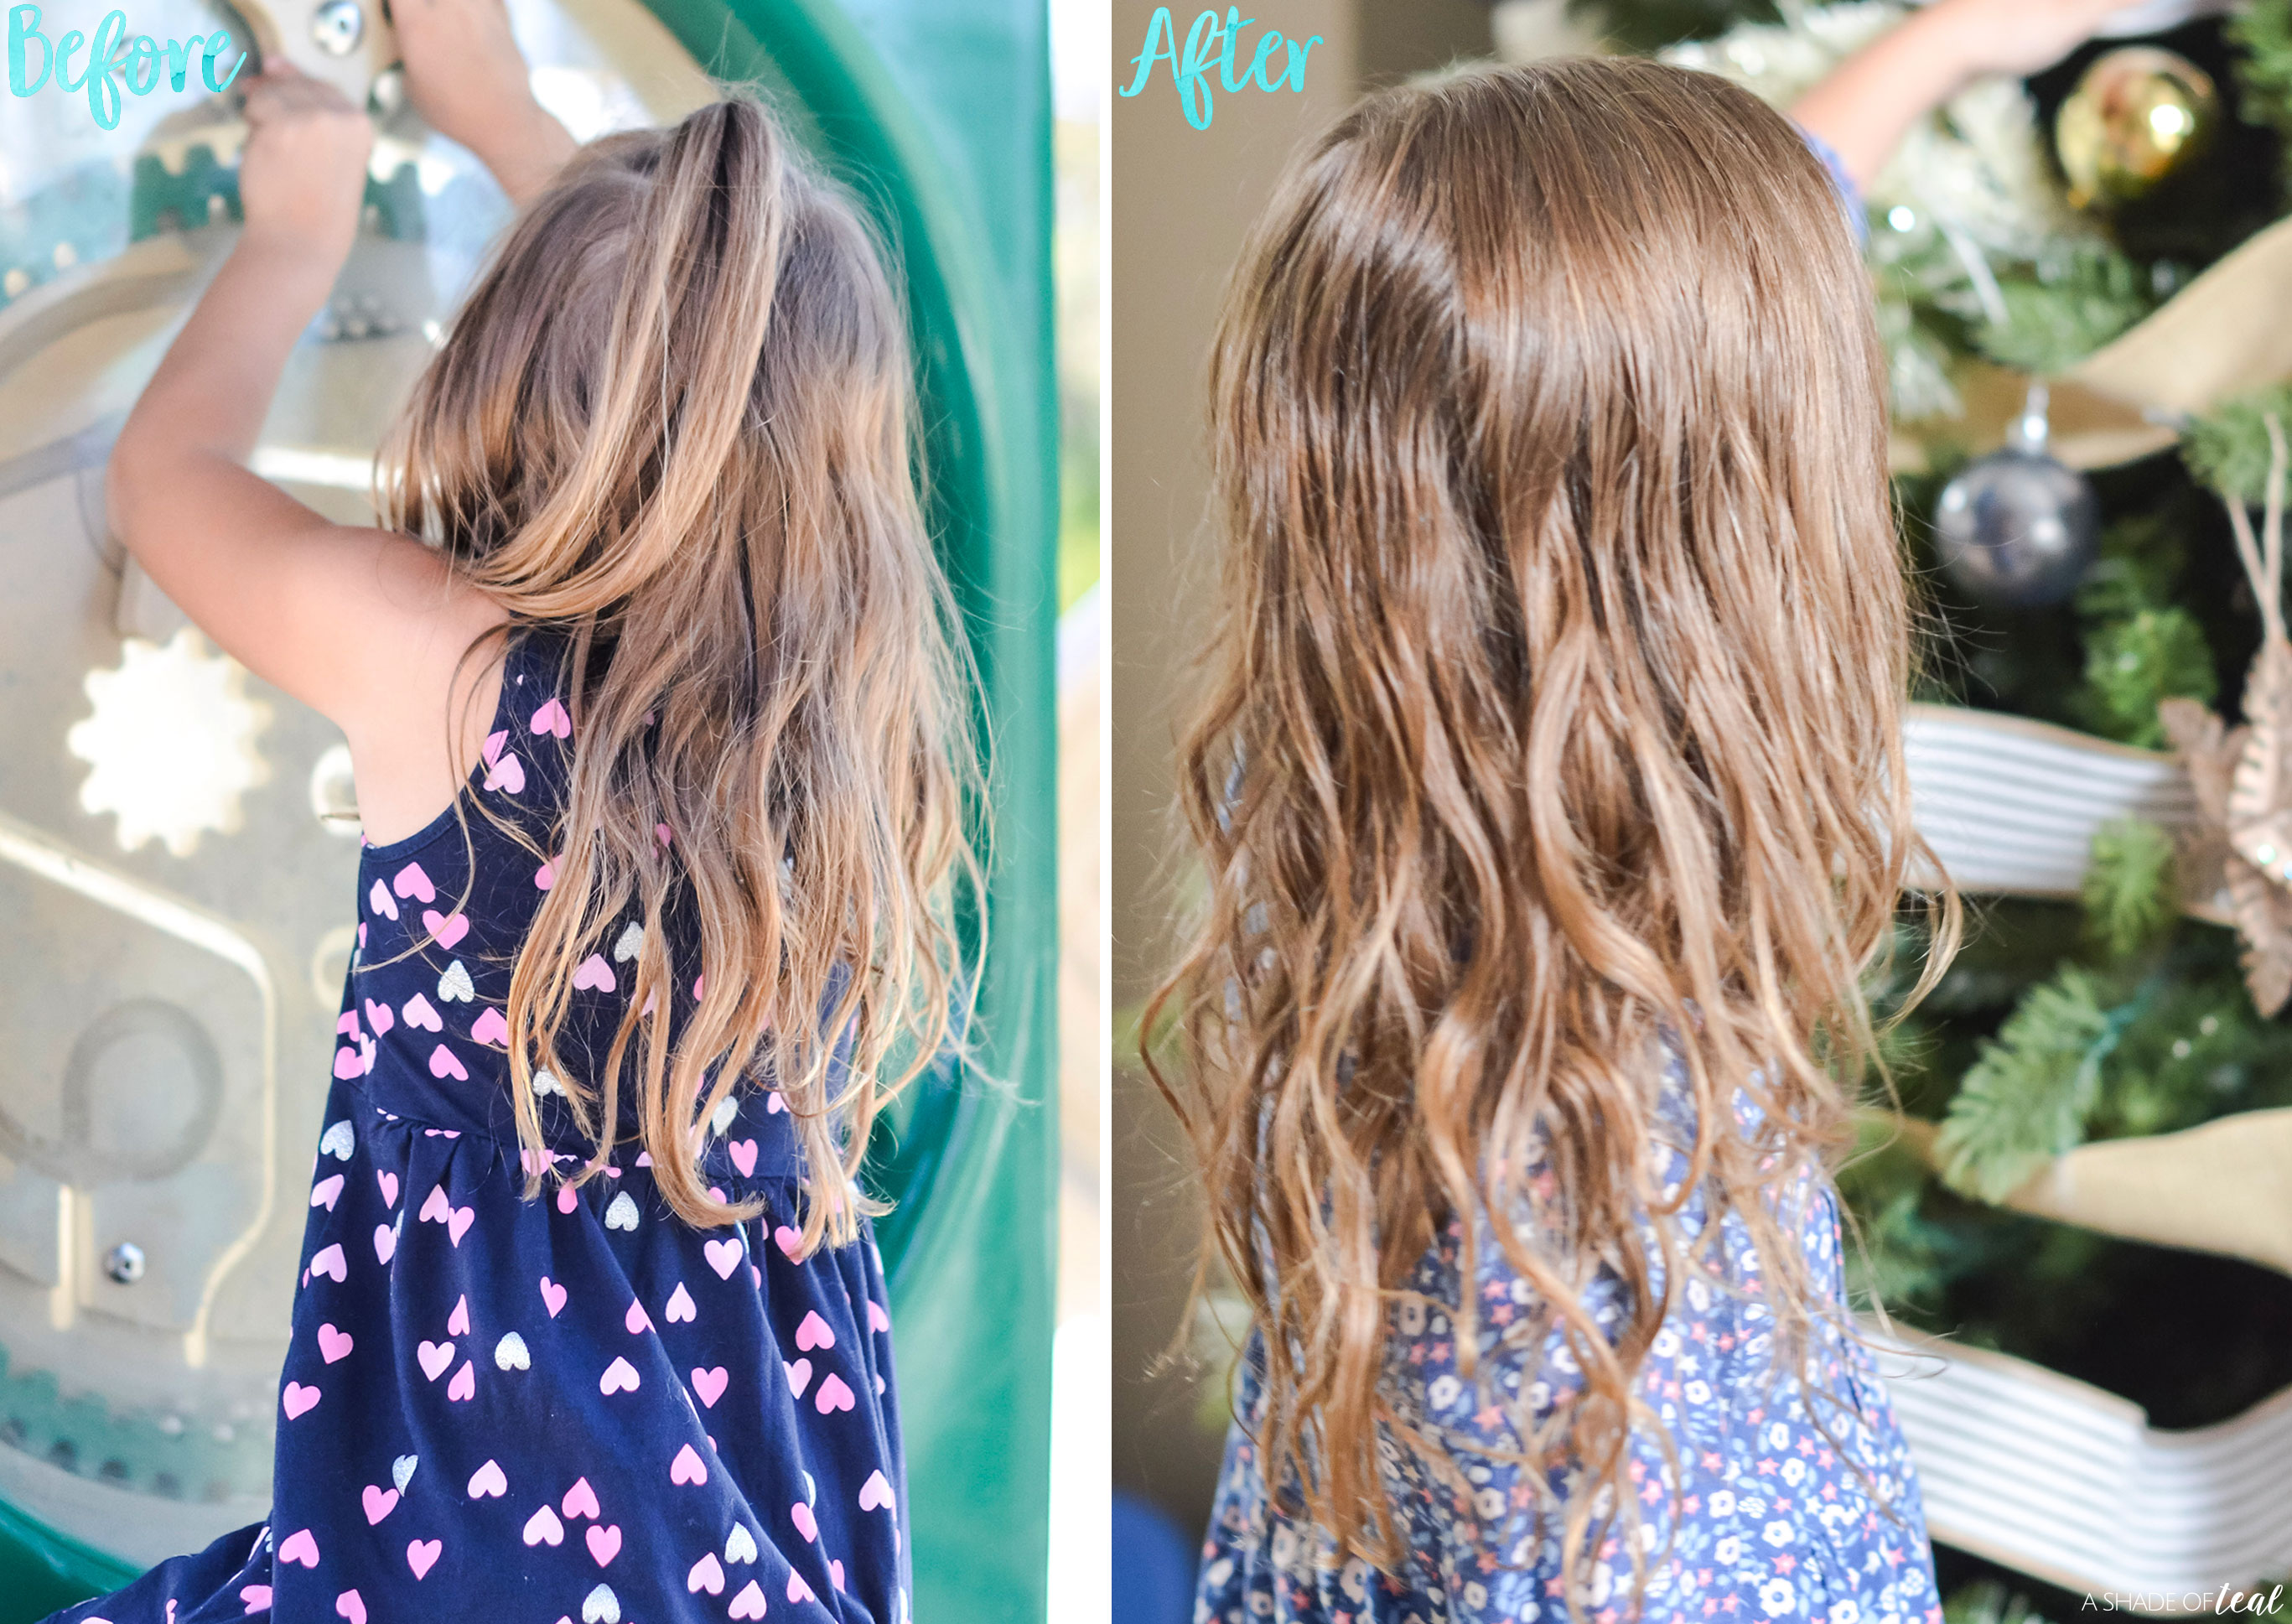 Tips & Tricks on How to Care for your Daughter's Wavy Curly Hair